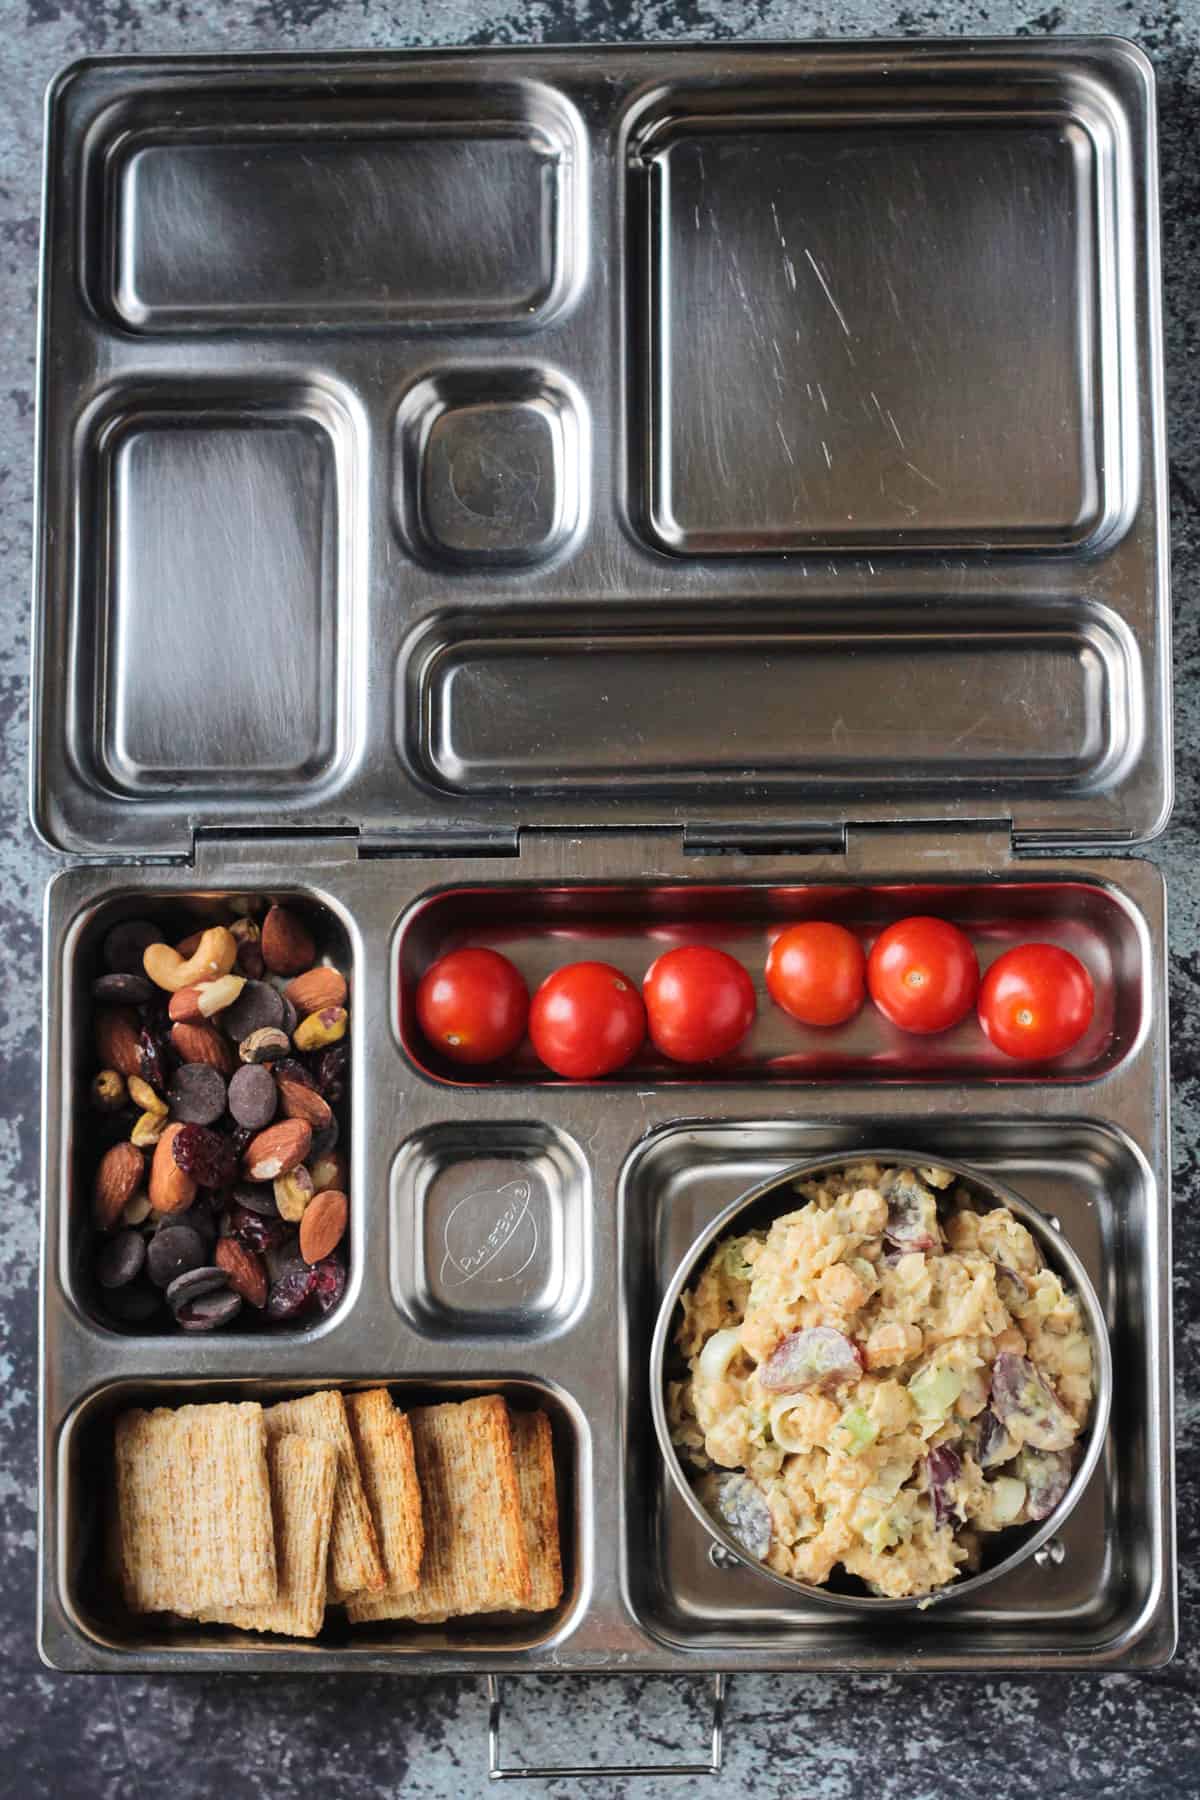 Metal lunchbox with chickpea salad, wheat crackers, trail mix, and grape tomatoes.